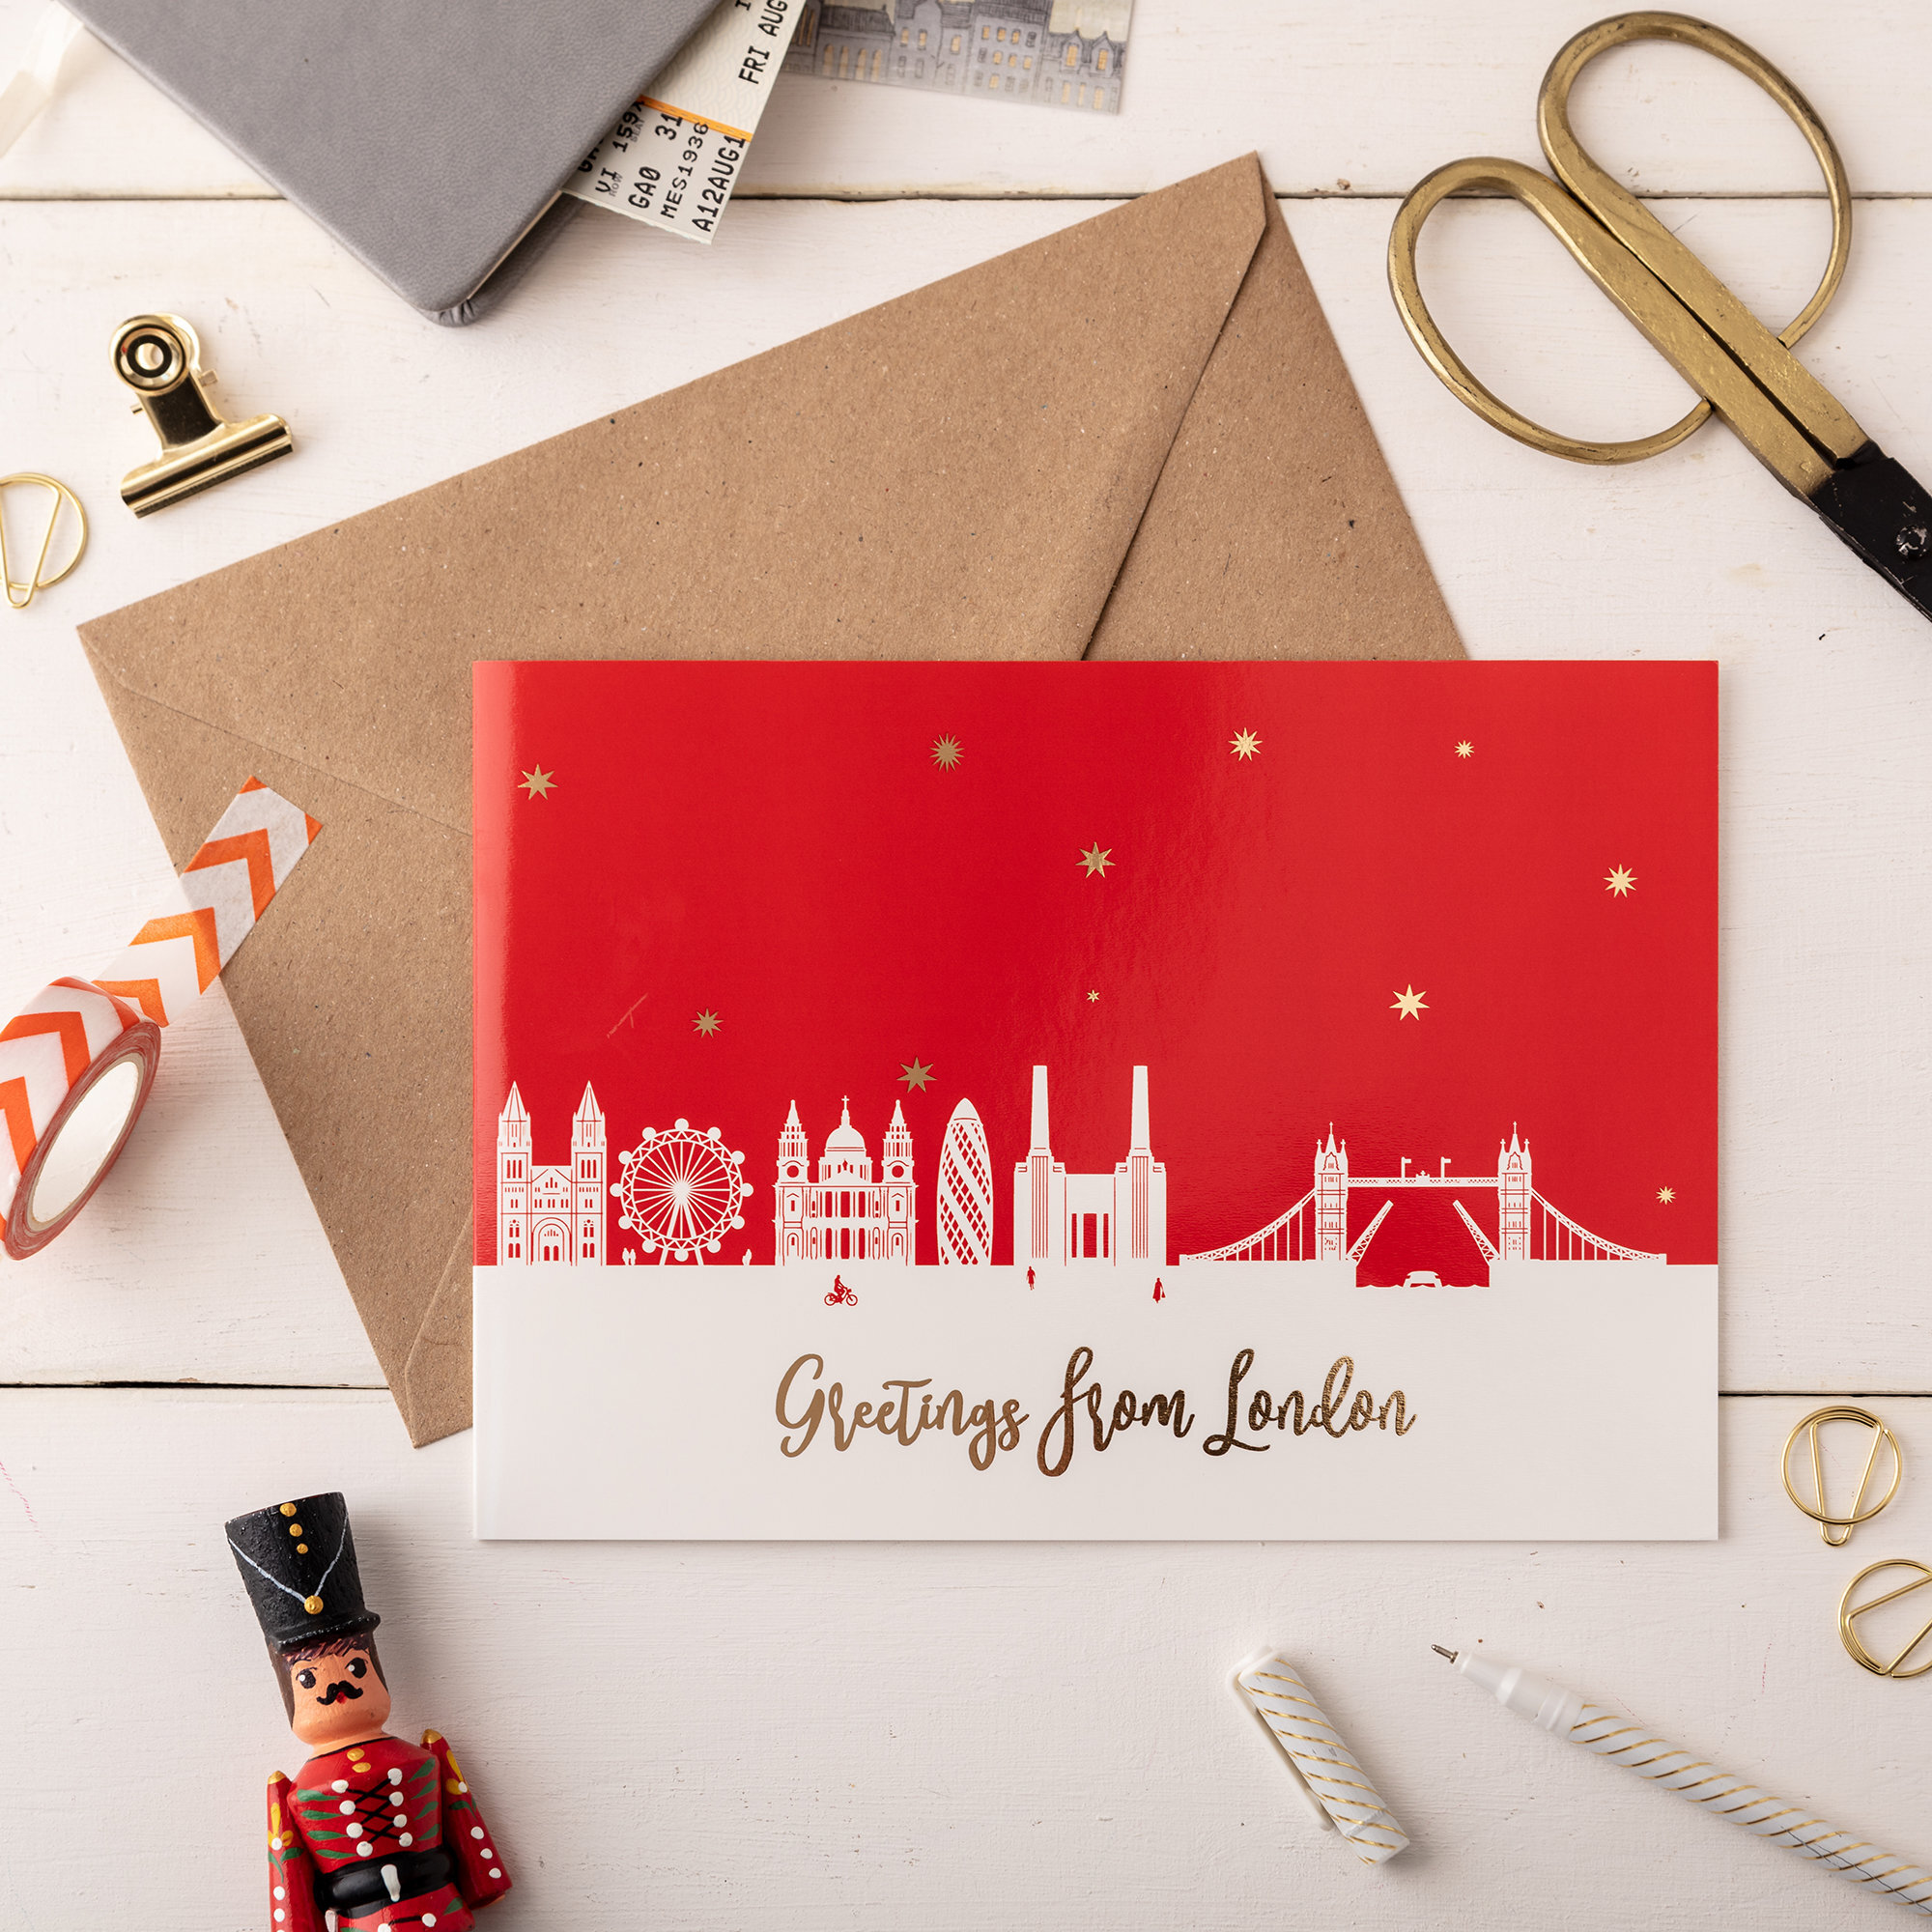 london red and gold greetings card.jpg